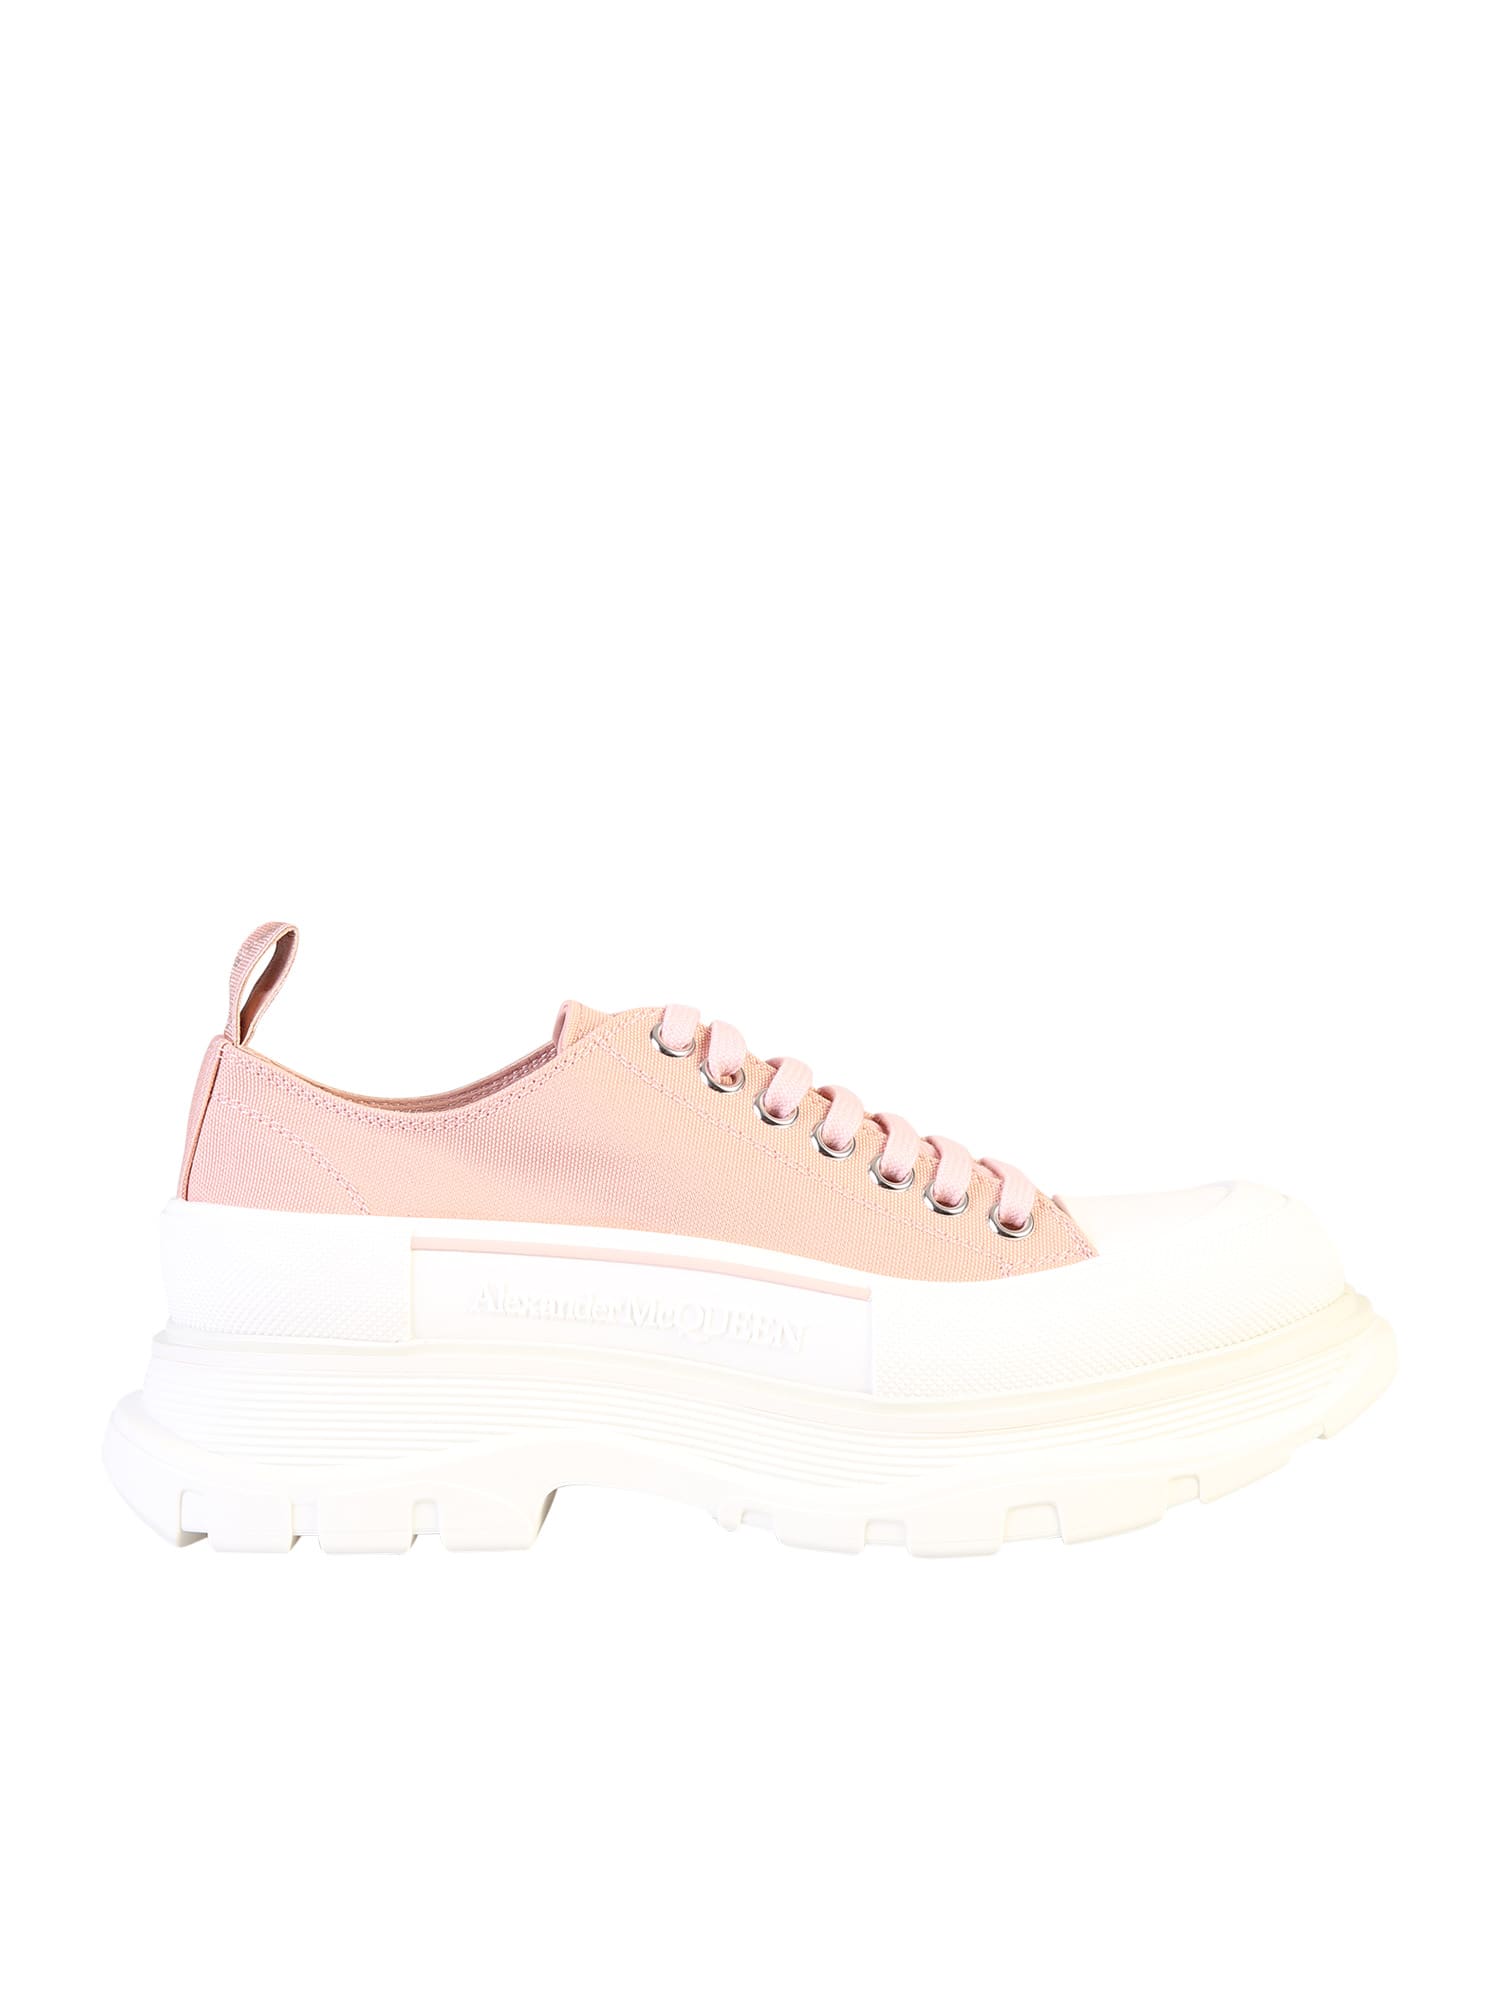 Buy Alexander McQueen Tread Slick Lace-up Sneakers online, shop Alexander McQueen shoes with free shipping